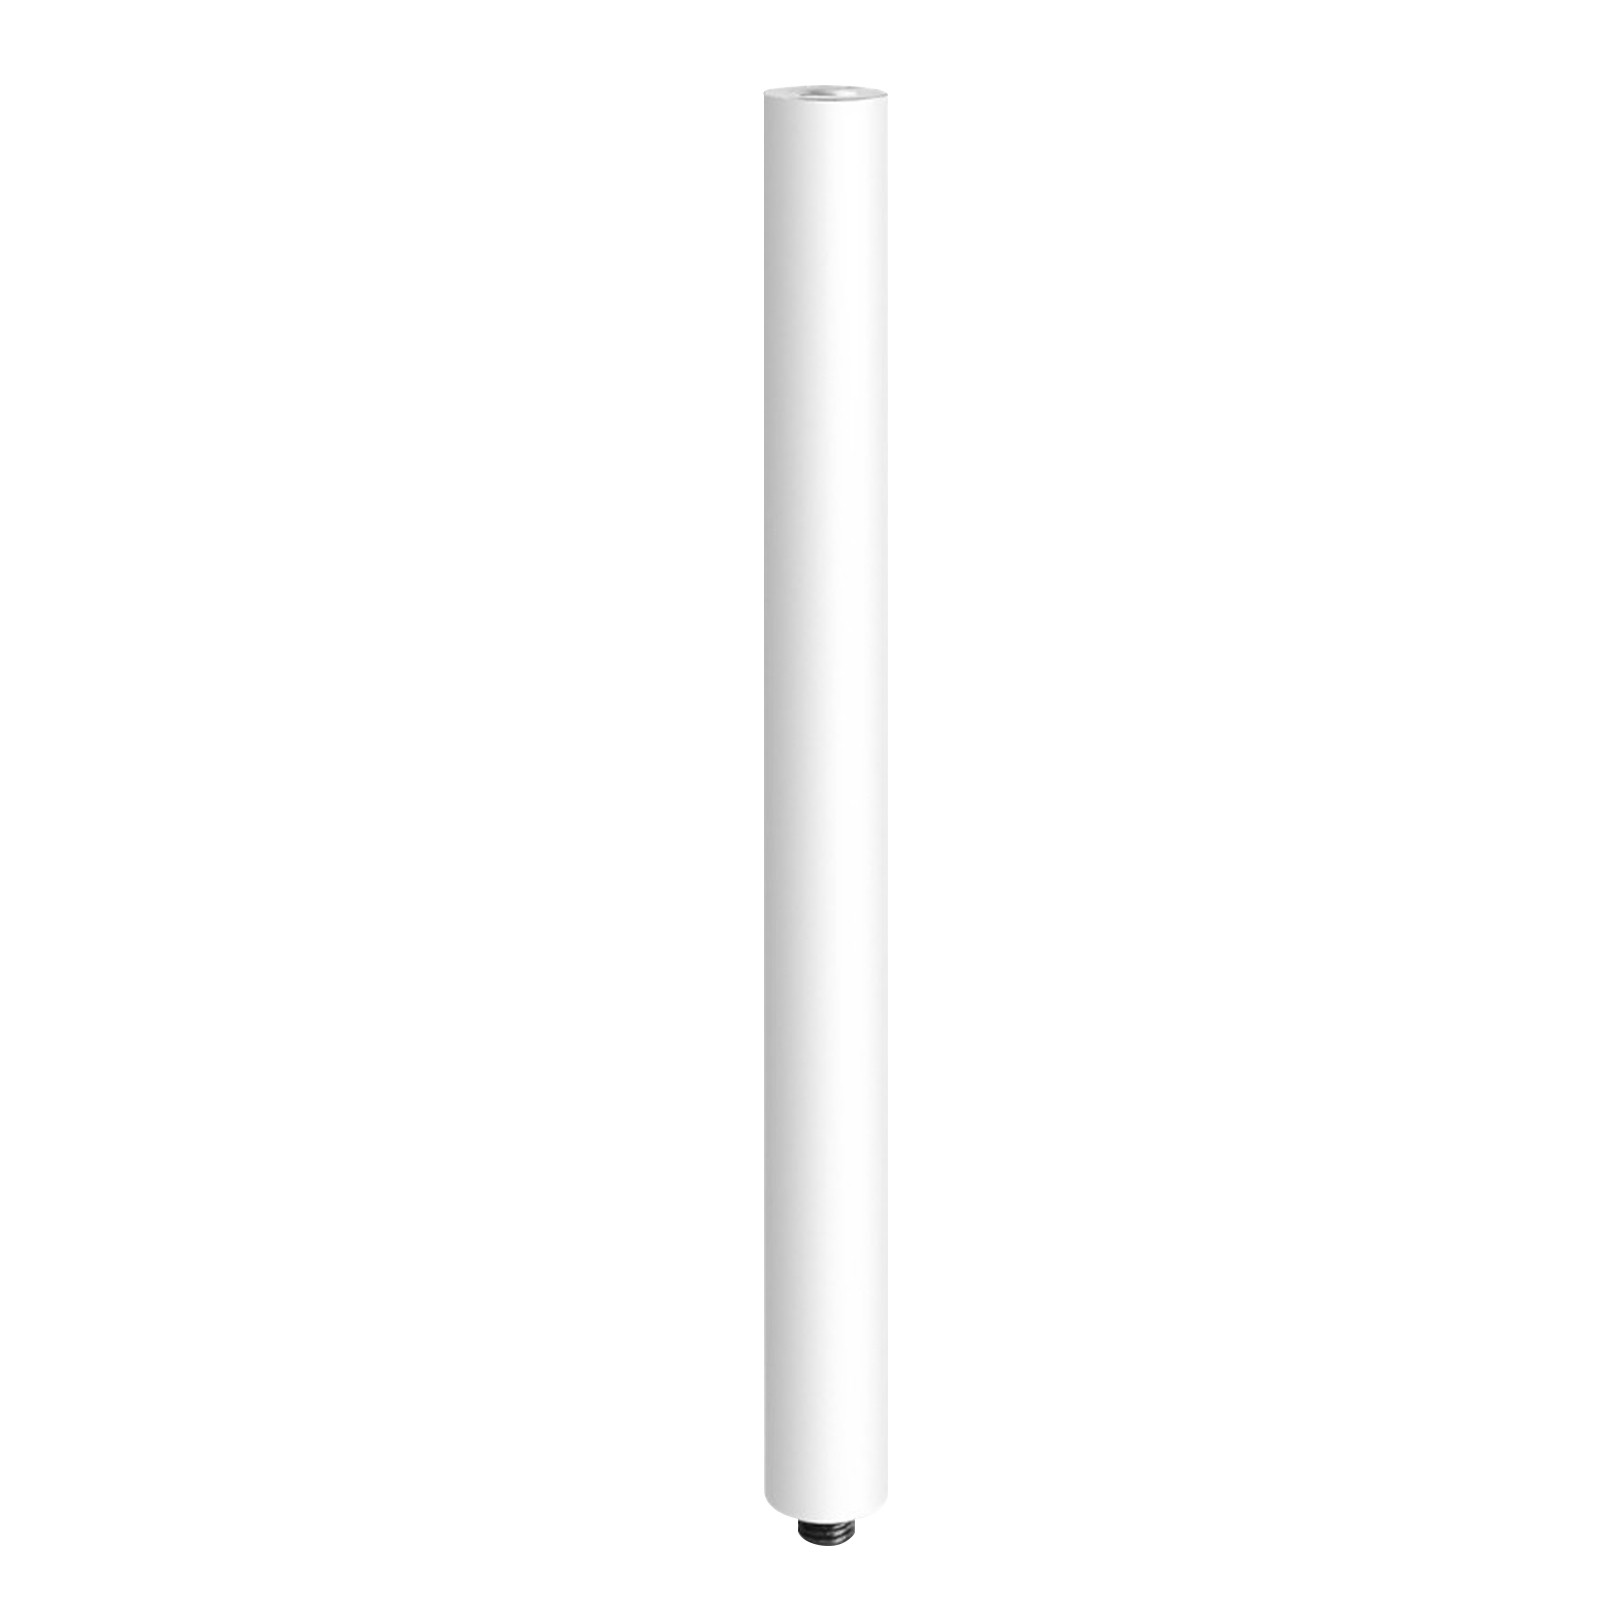 gravity-stands-gsp2332extw---speaker-pole-extension-white.jpeg